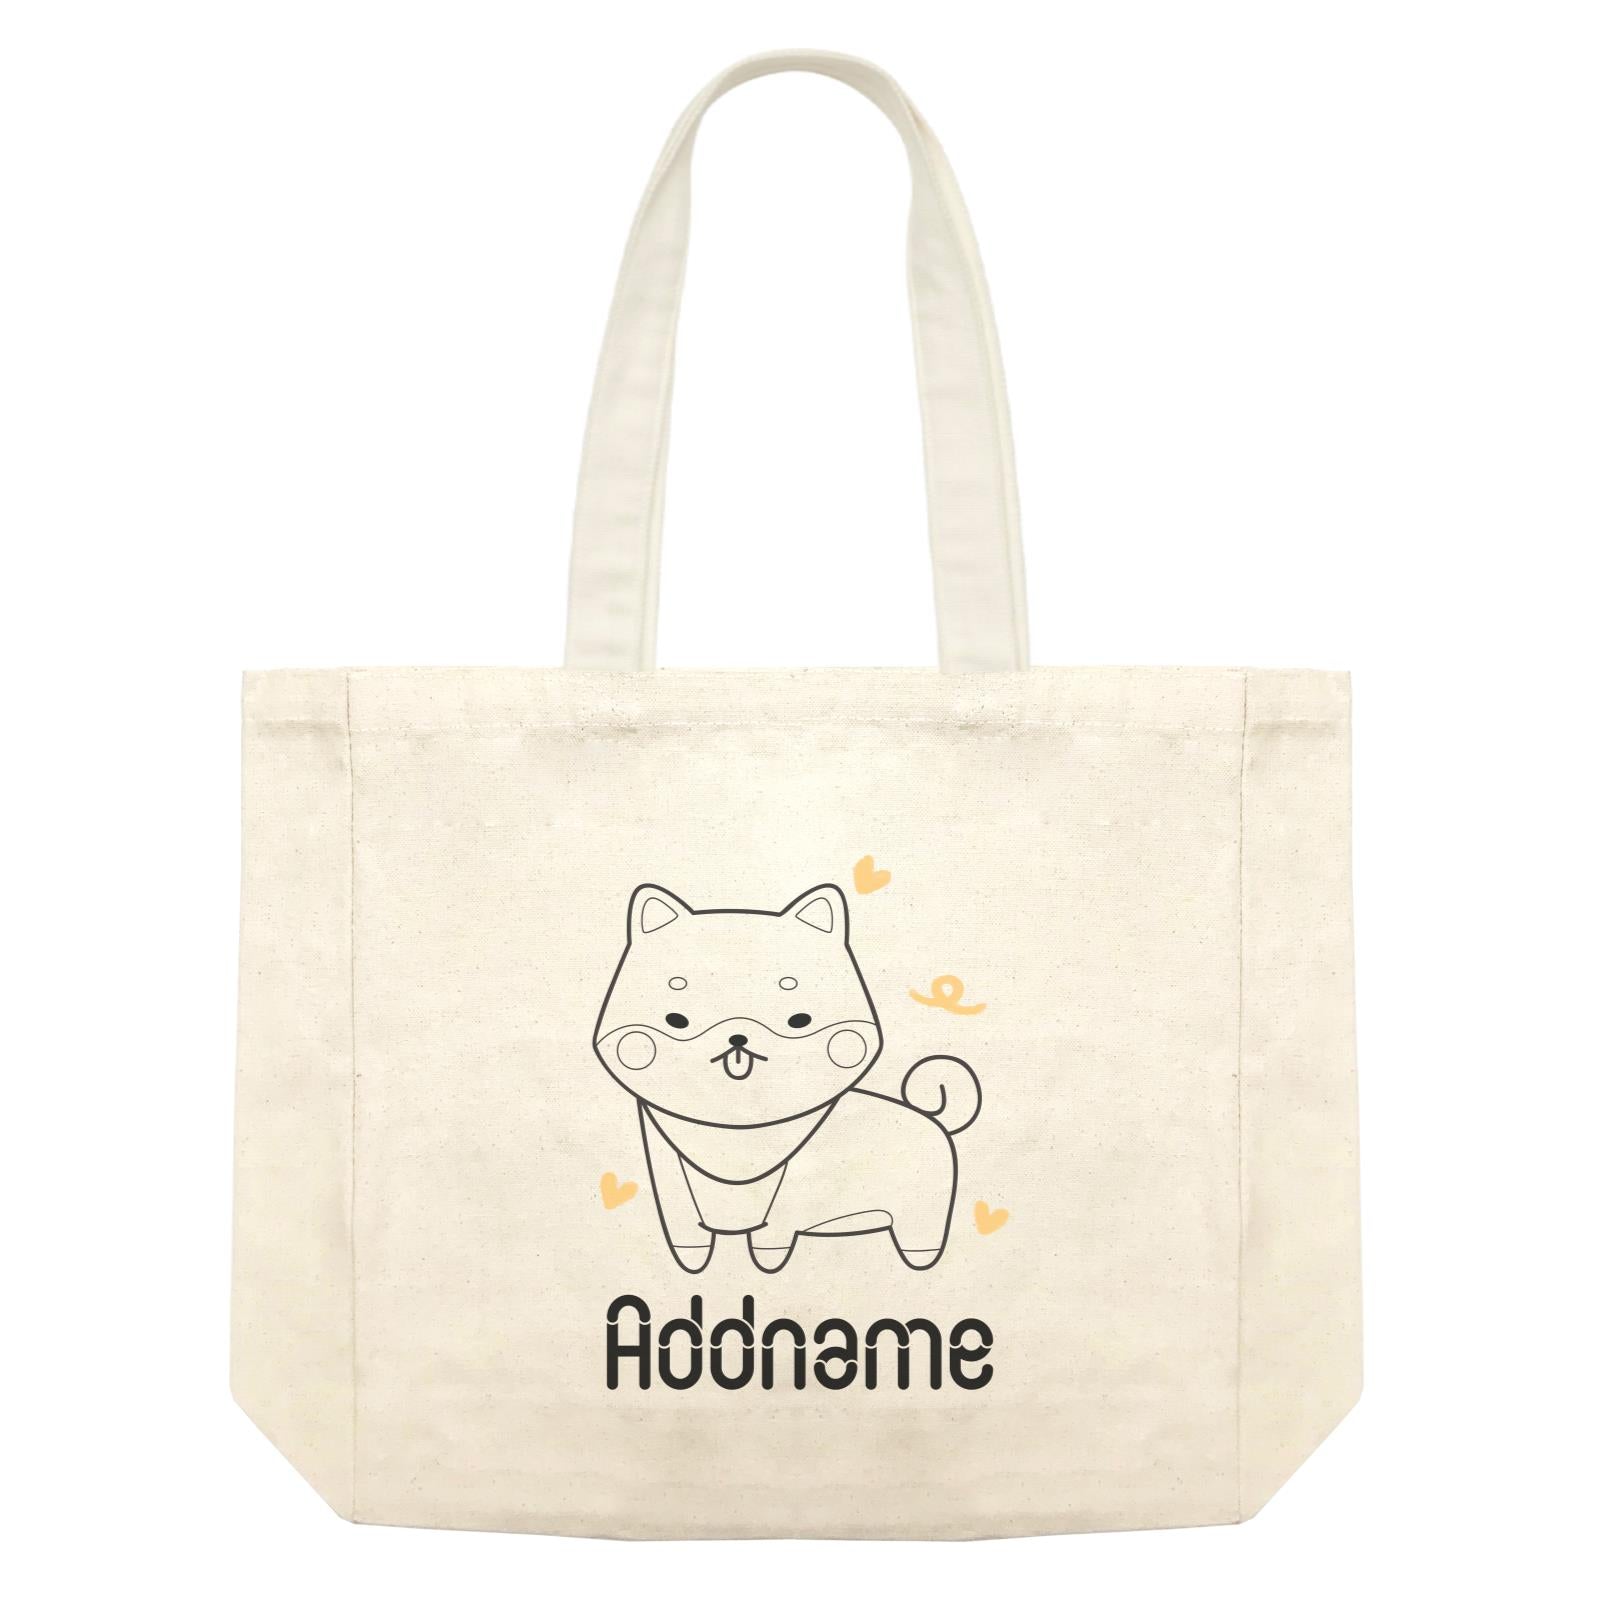 Coloring Outline Cute Hand Drawn Animals Dogs Shiba Addname Shopping Bag